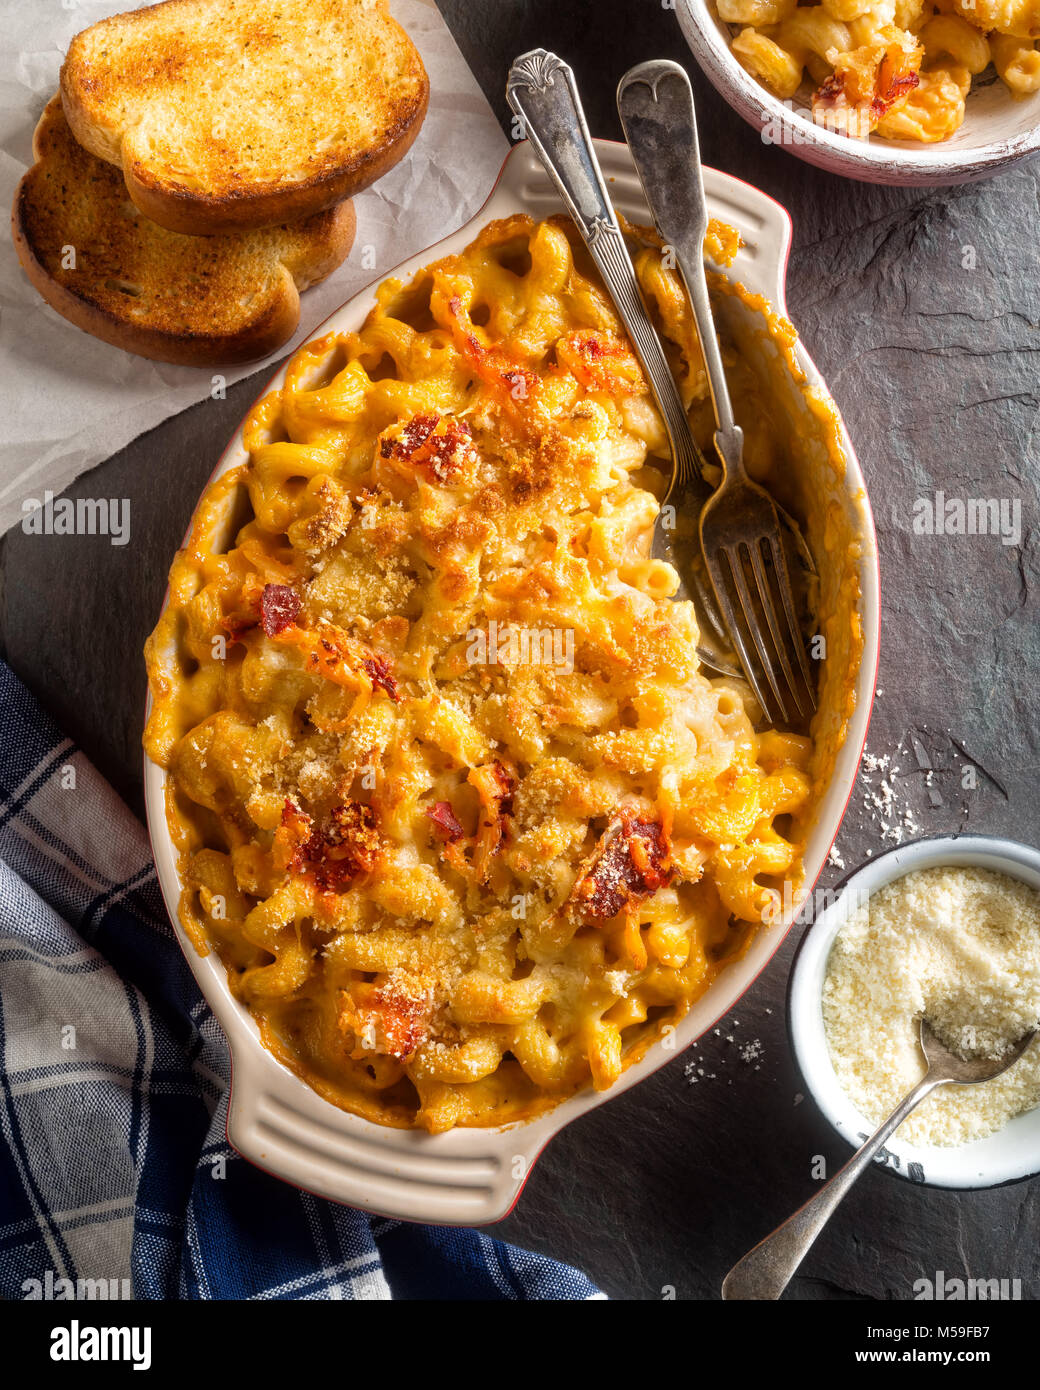 An overhead view of delicious lobster mac and cheese with toasted bread. Stock Photo